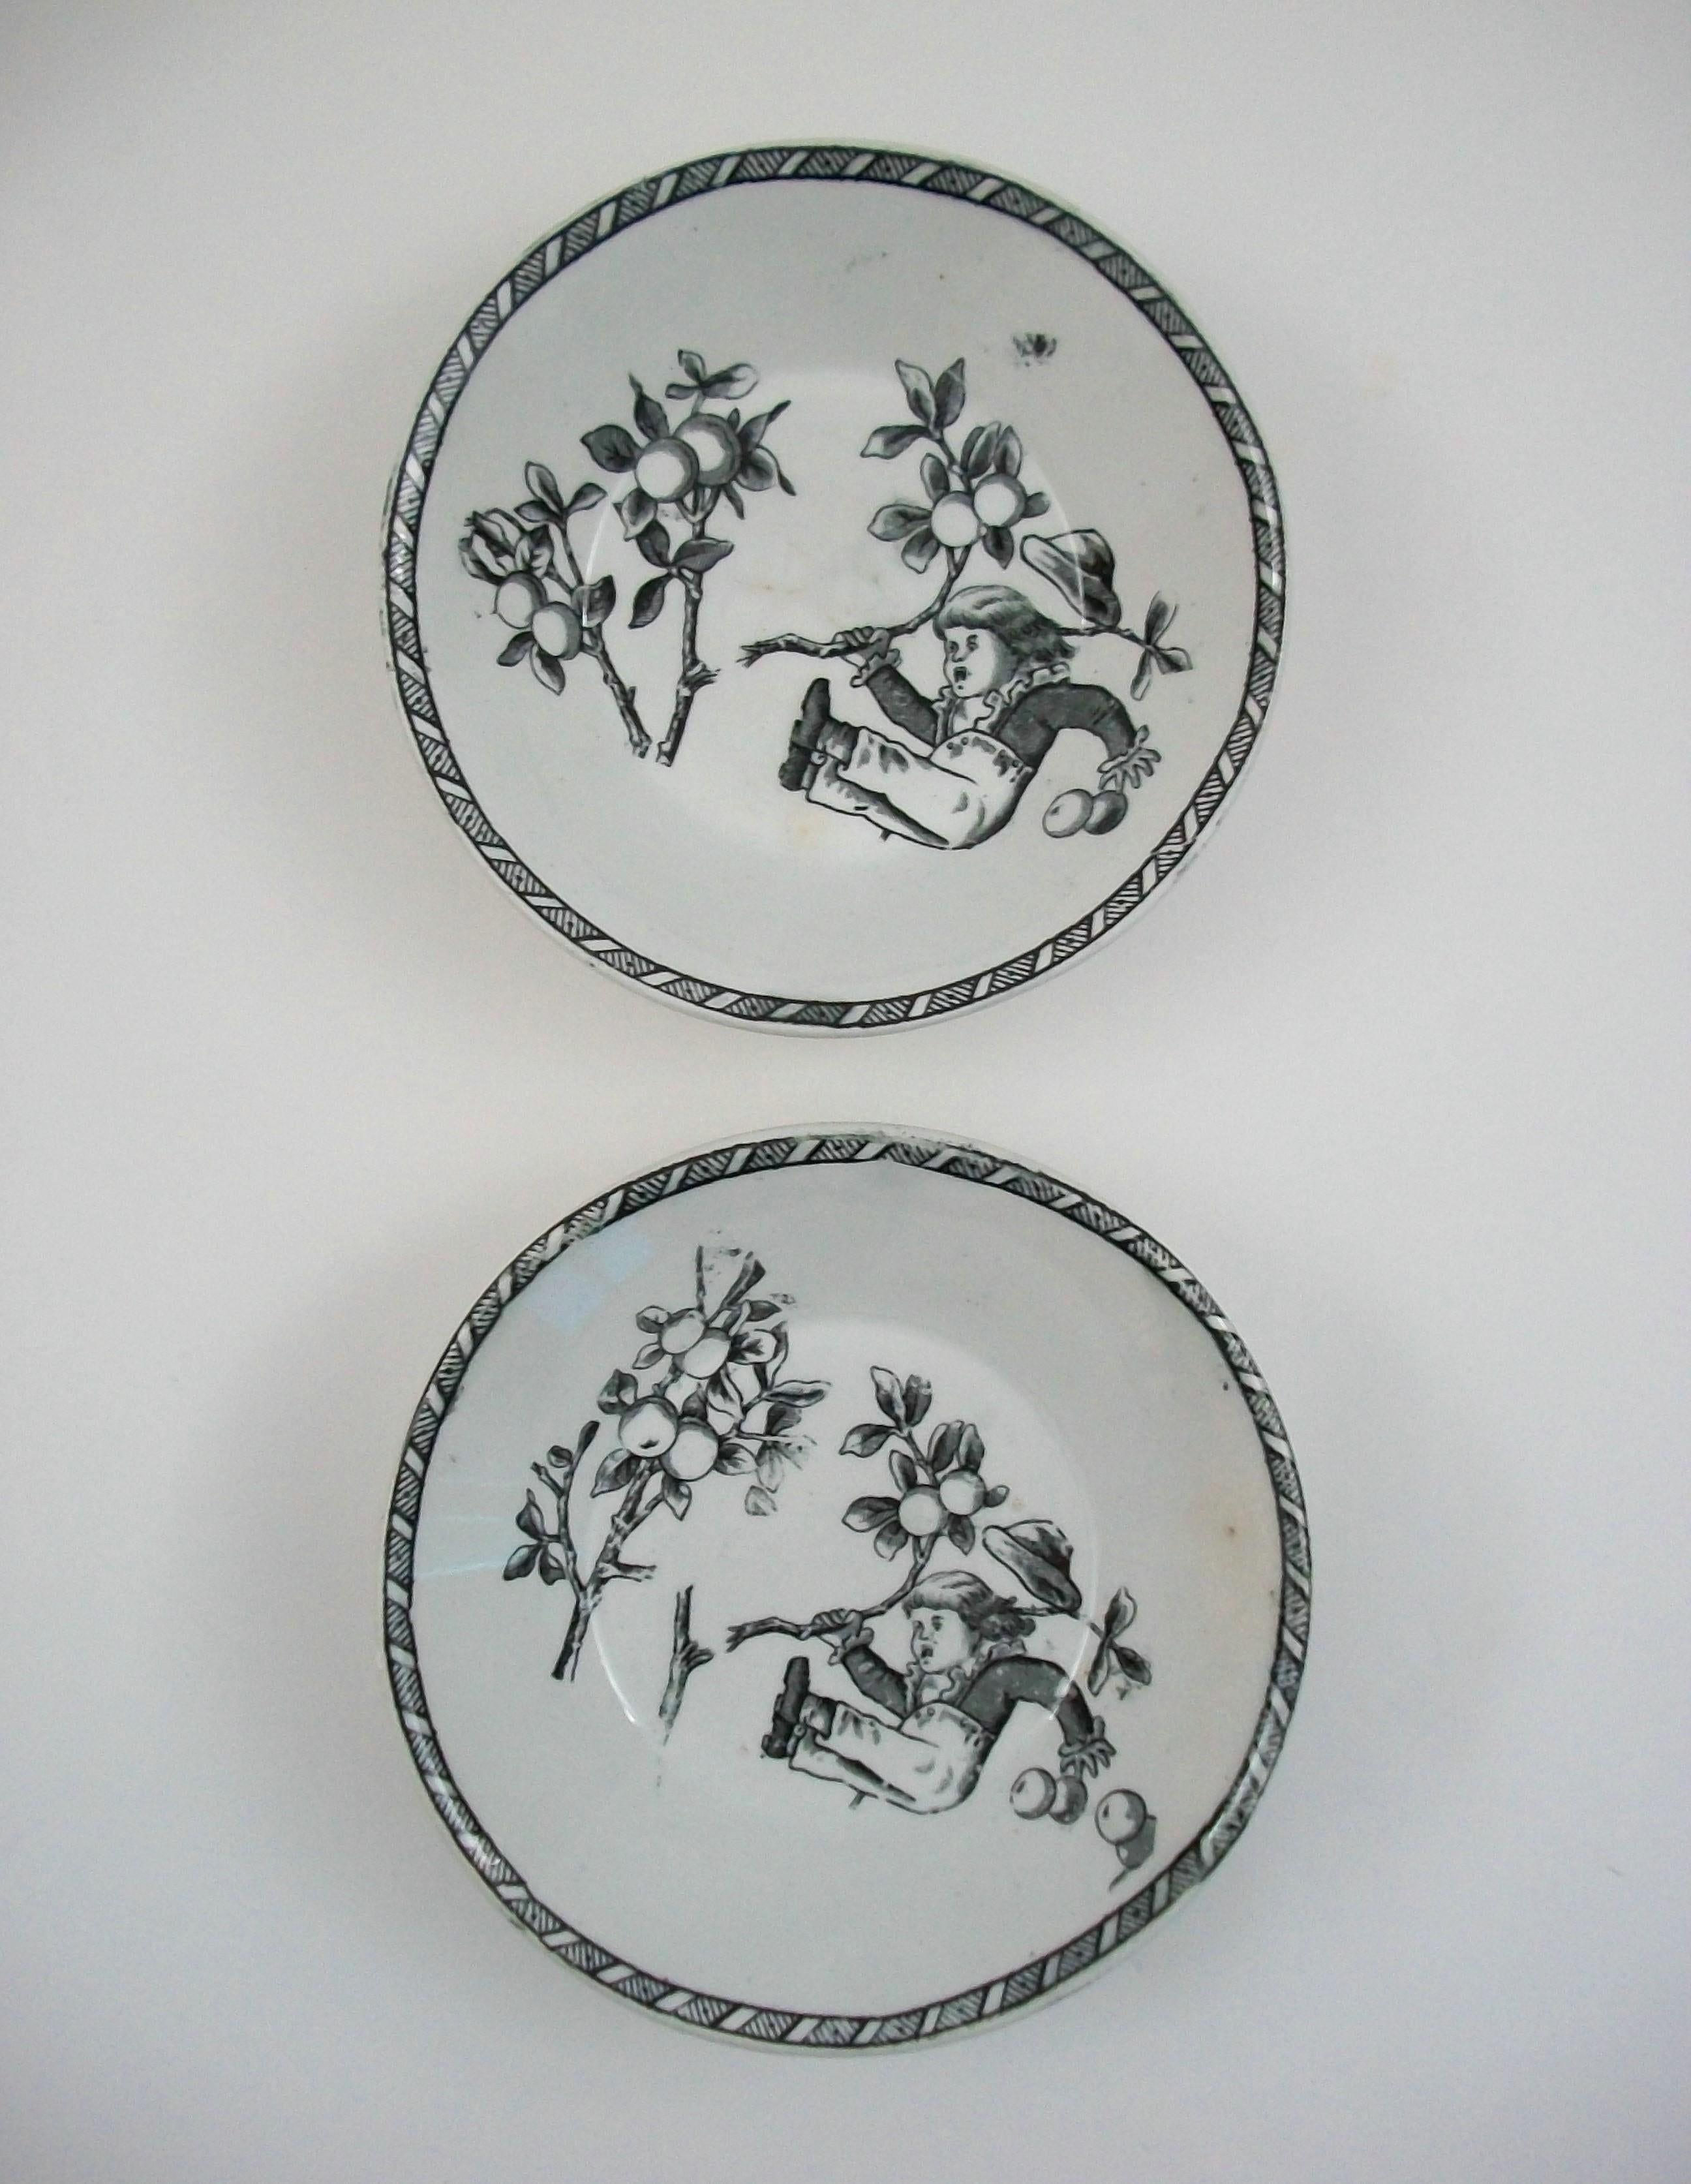 W. H. GRINDLEY & CO. - Daffodil - Set of two antique Victorian black transfer decorated fruit bowls - featuring whimsical prints to the center of each bowl with continuous printed borders - signed on the back of one (black printed back stamp and